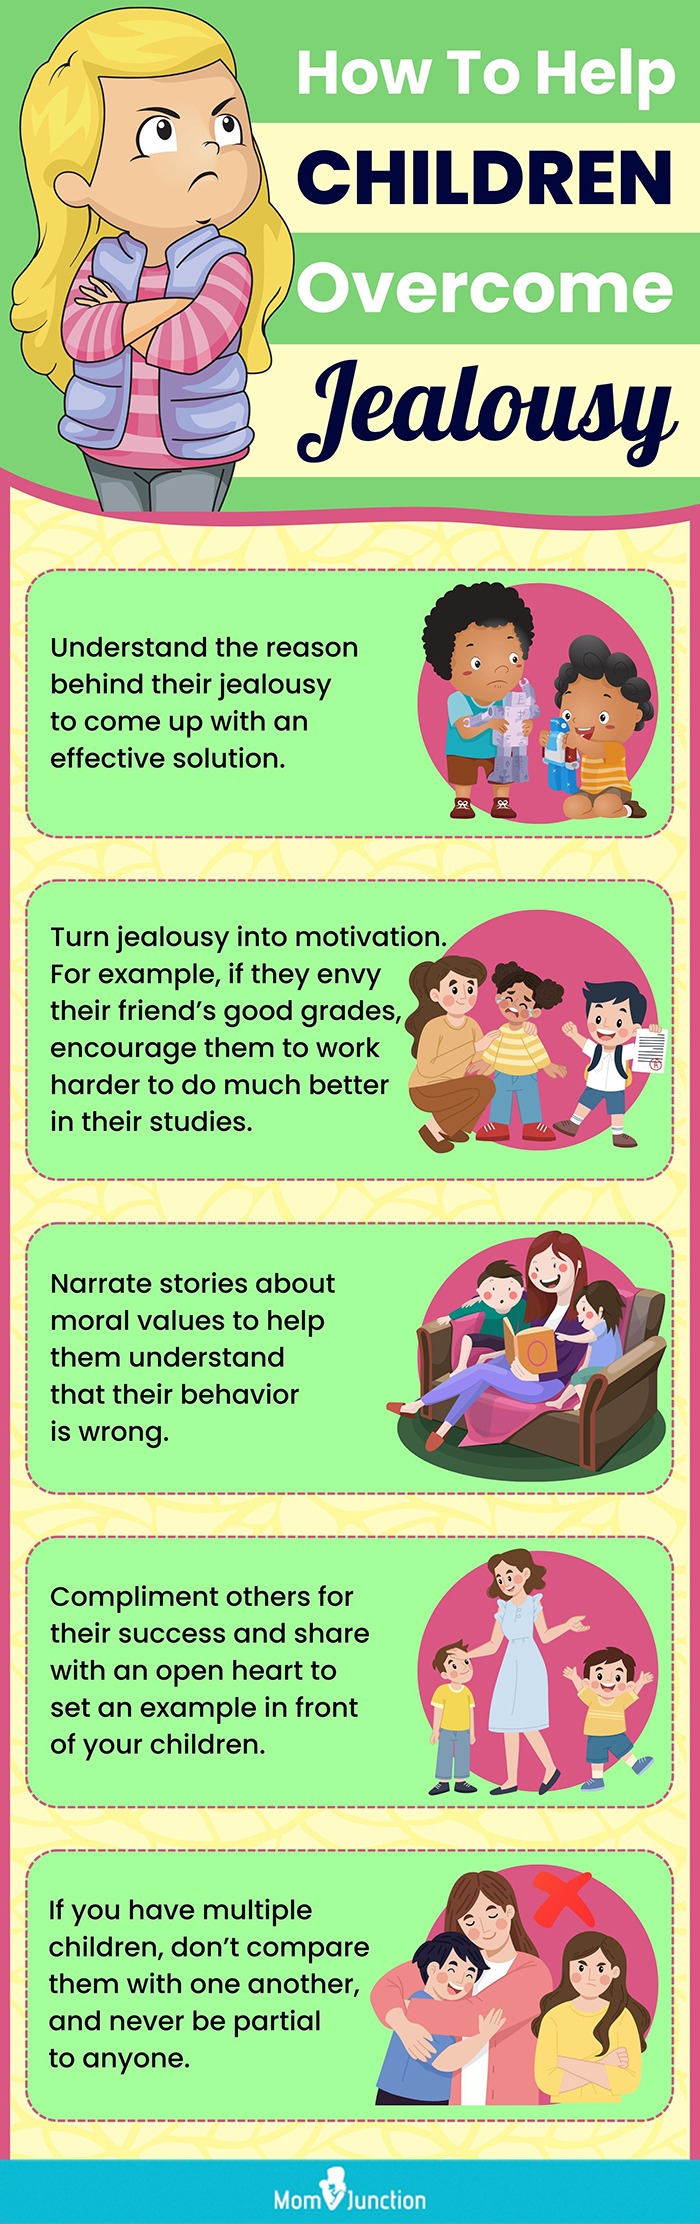 how to help children overcome jealousy [infographic]